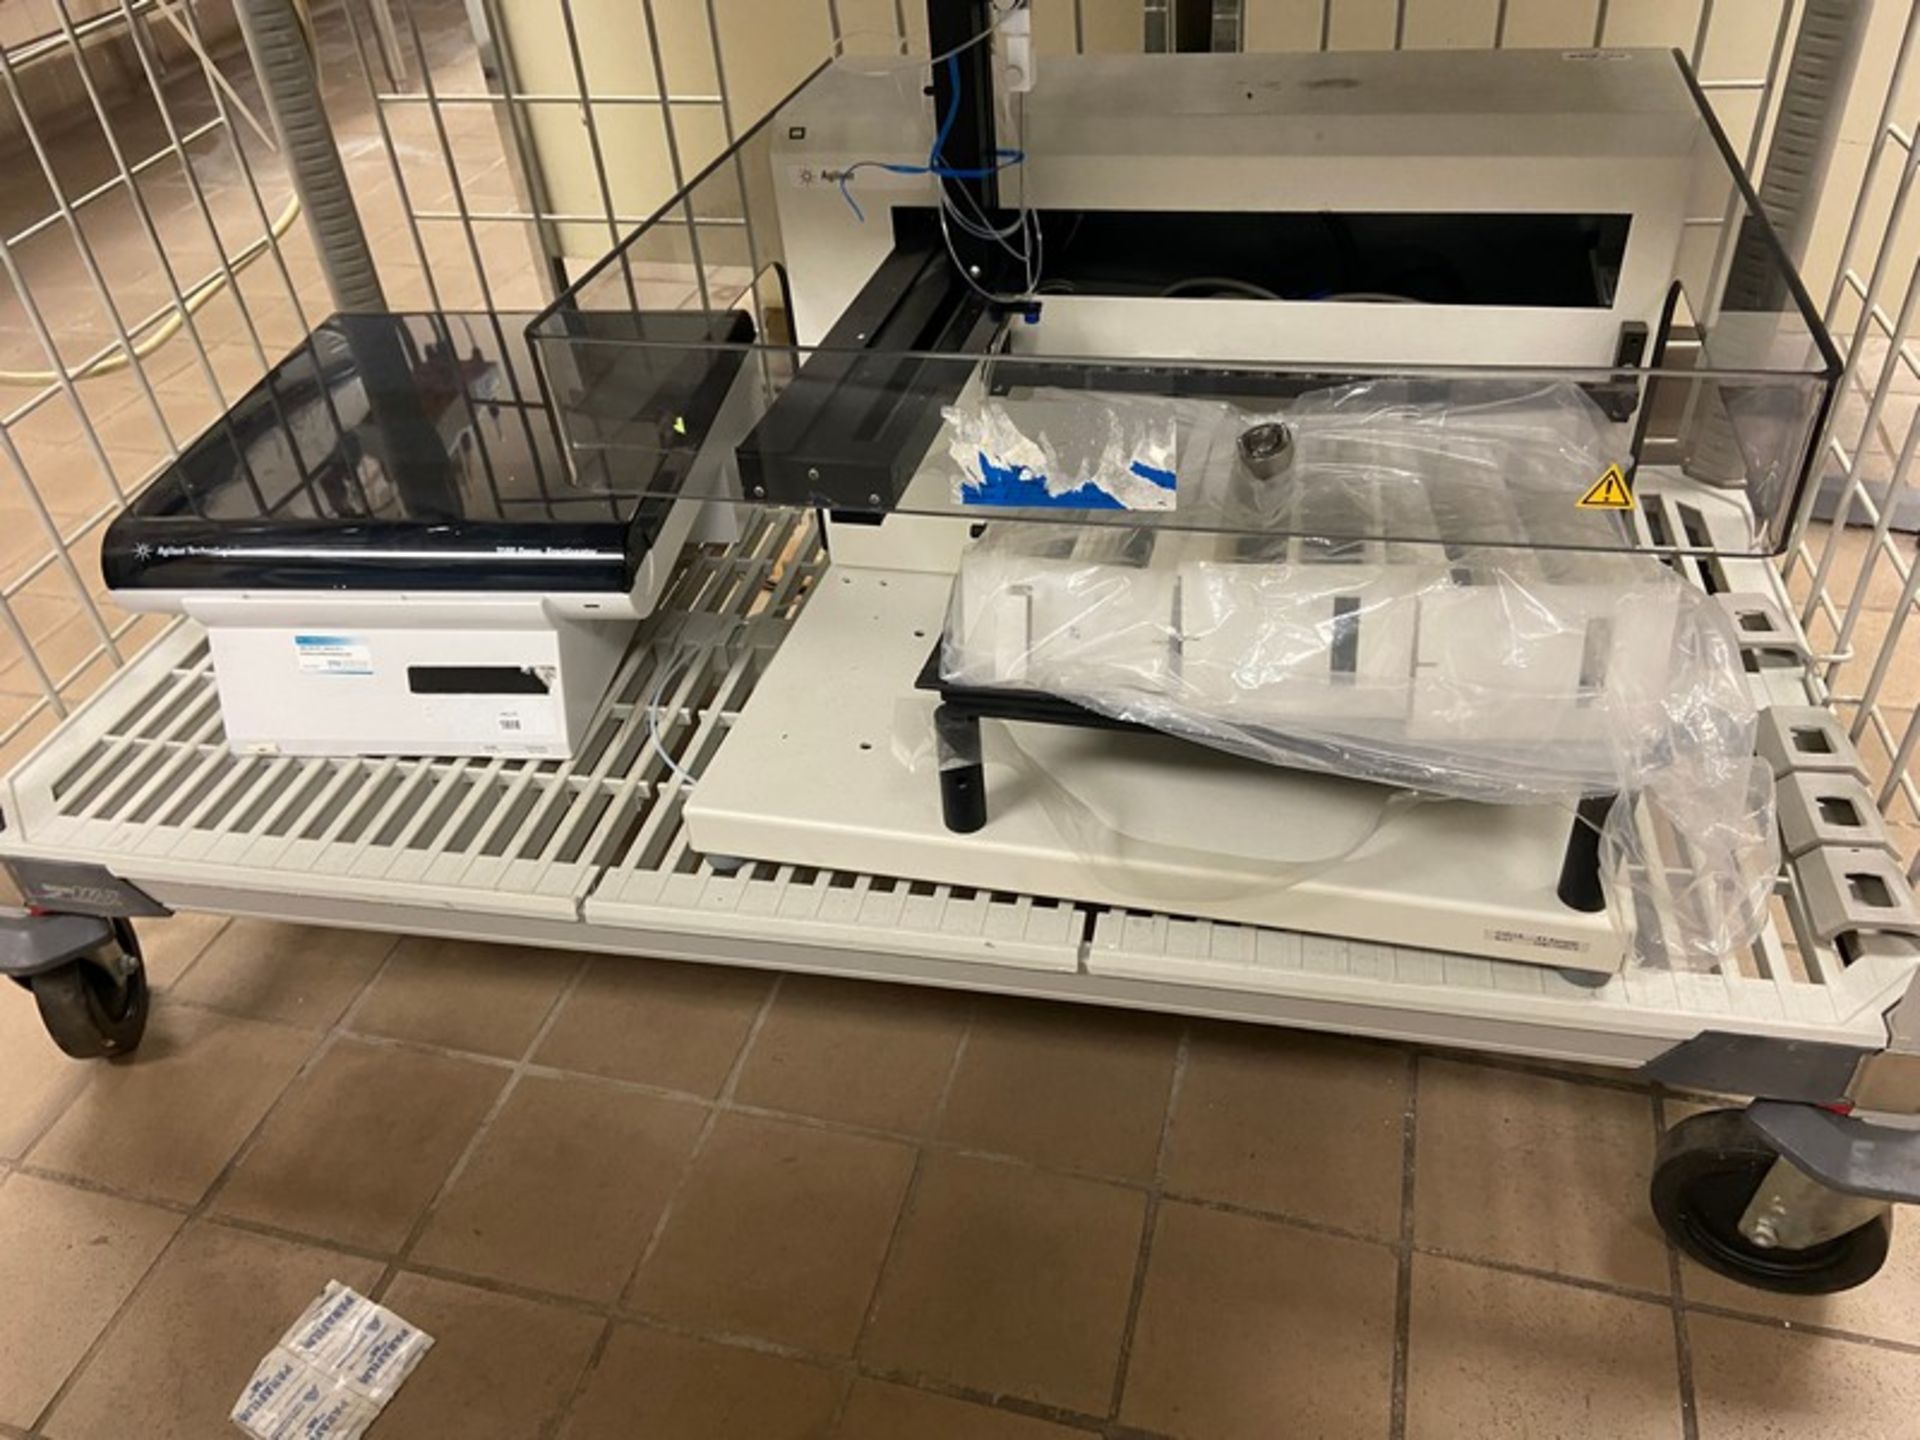 Agilent Technologies 3100 Offgel Fractionator (LOCATED IN MIDDLETOWN, N.Y.)-FOR PACKAGING & SHIPPING